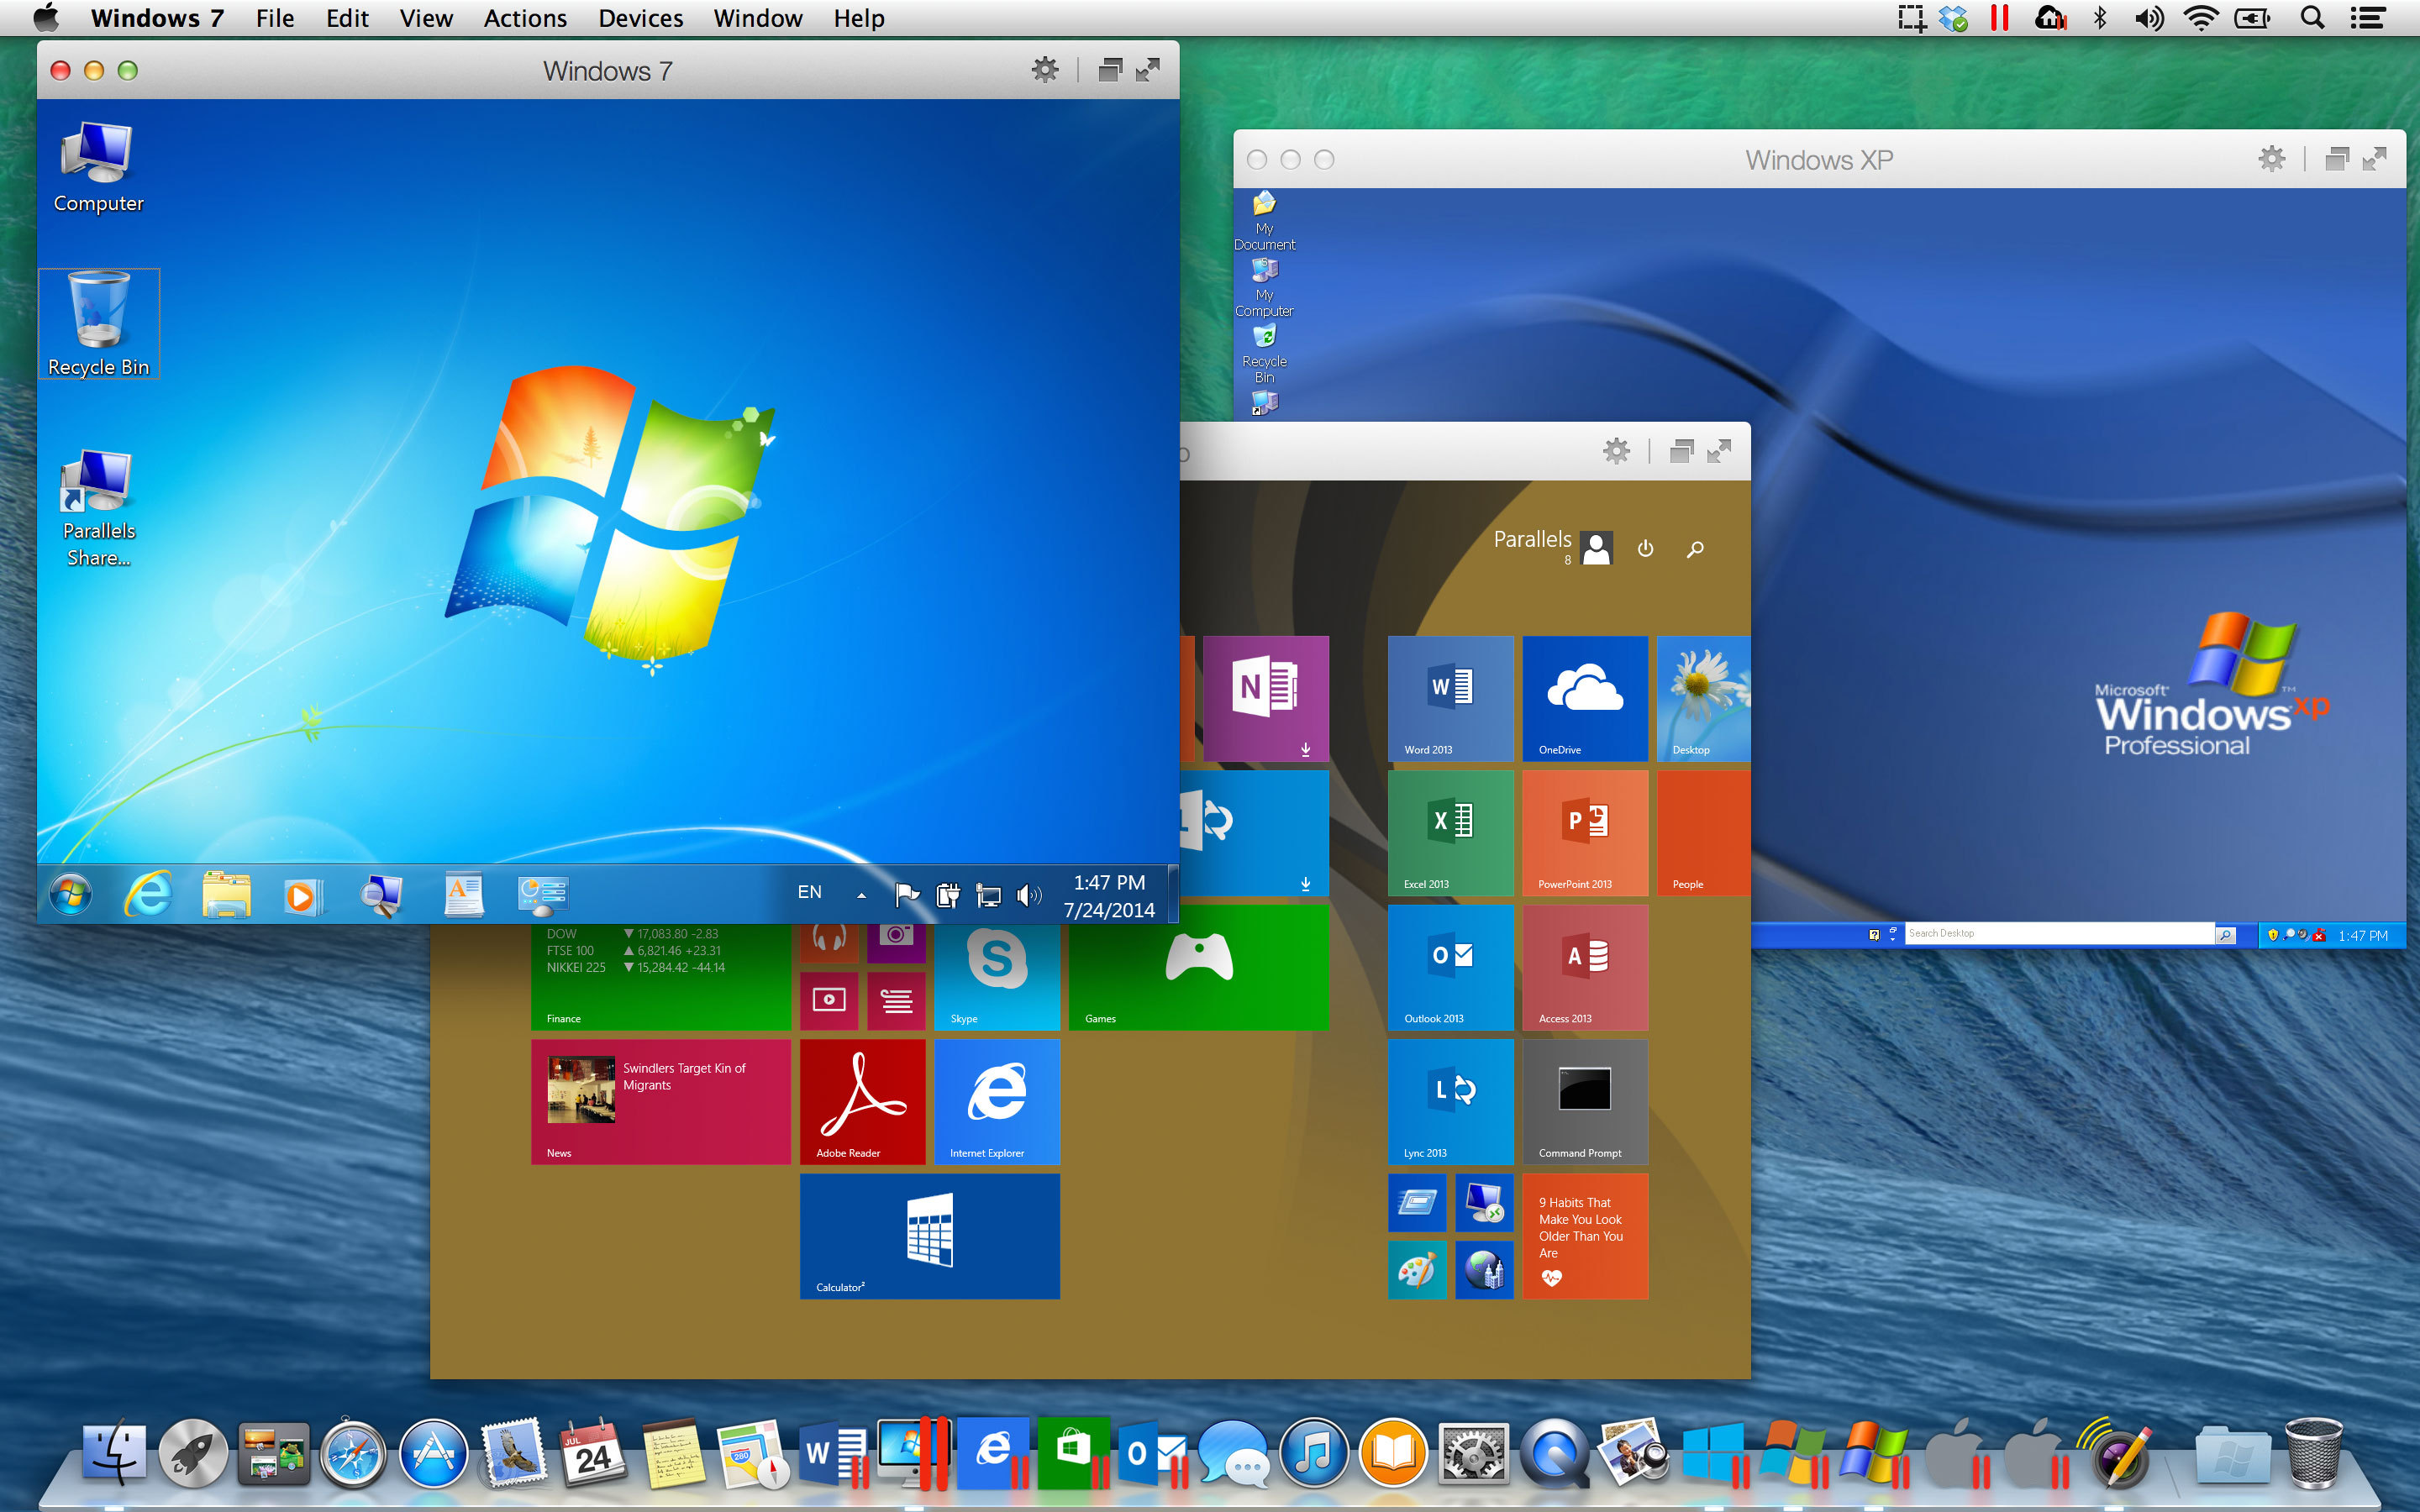 Parallels Desktop 10 is out with OS X Yosemite support, better battery